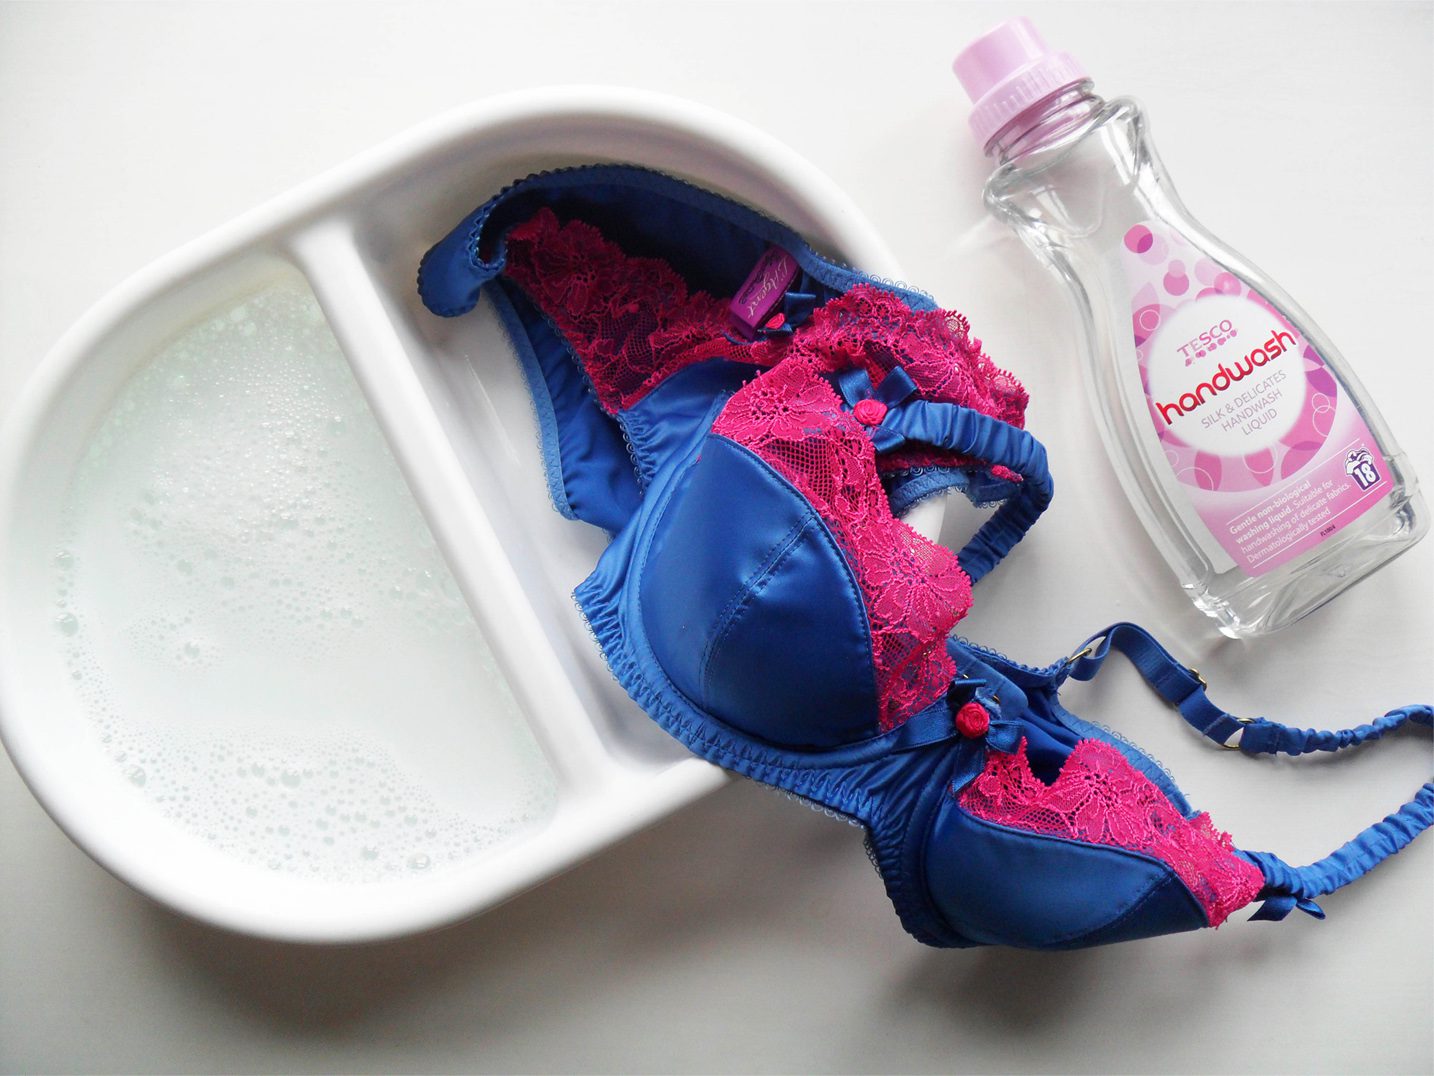 6 Reasons Your Bras Can Get Stained or Discoloured